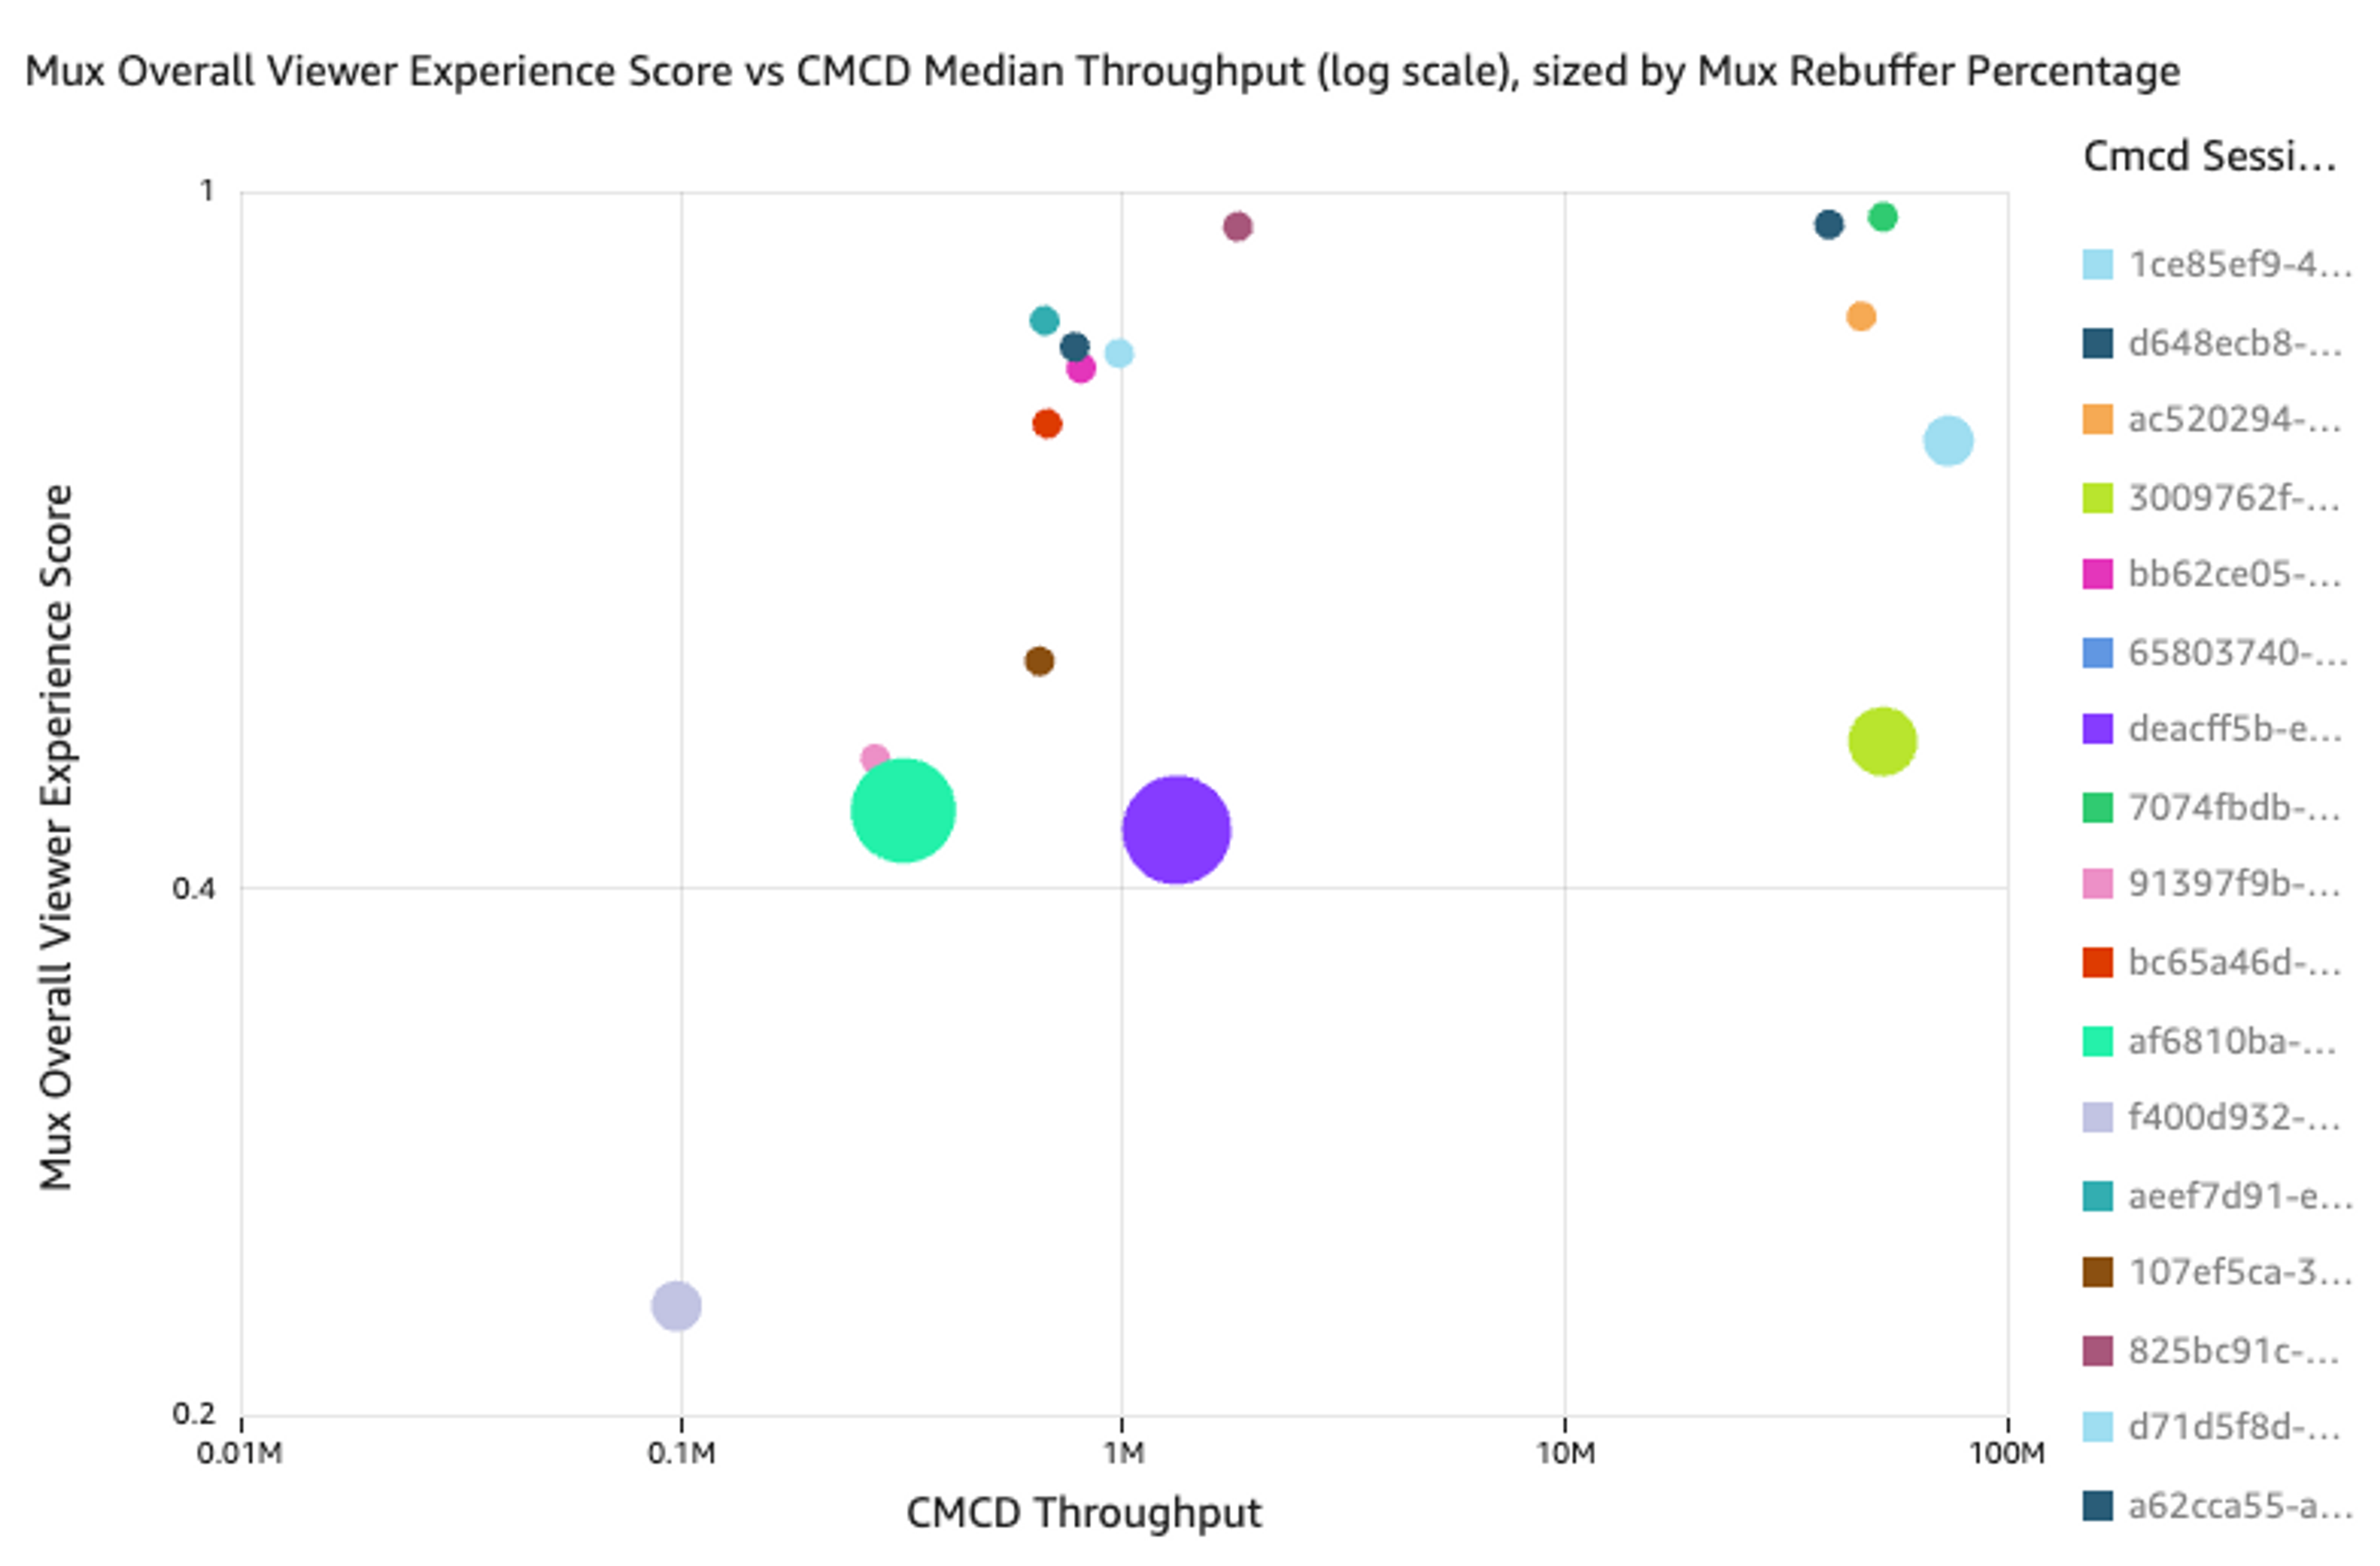 An image of Mux Overall Viewer Experience Score vs CMCD Median Throughput (log scale), sized by Mux Rebuffer Percentage